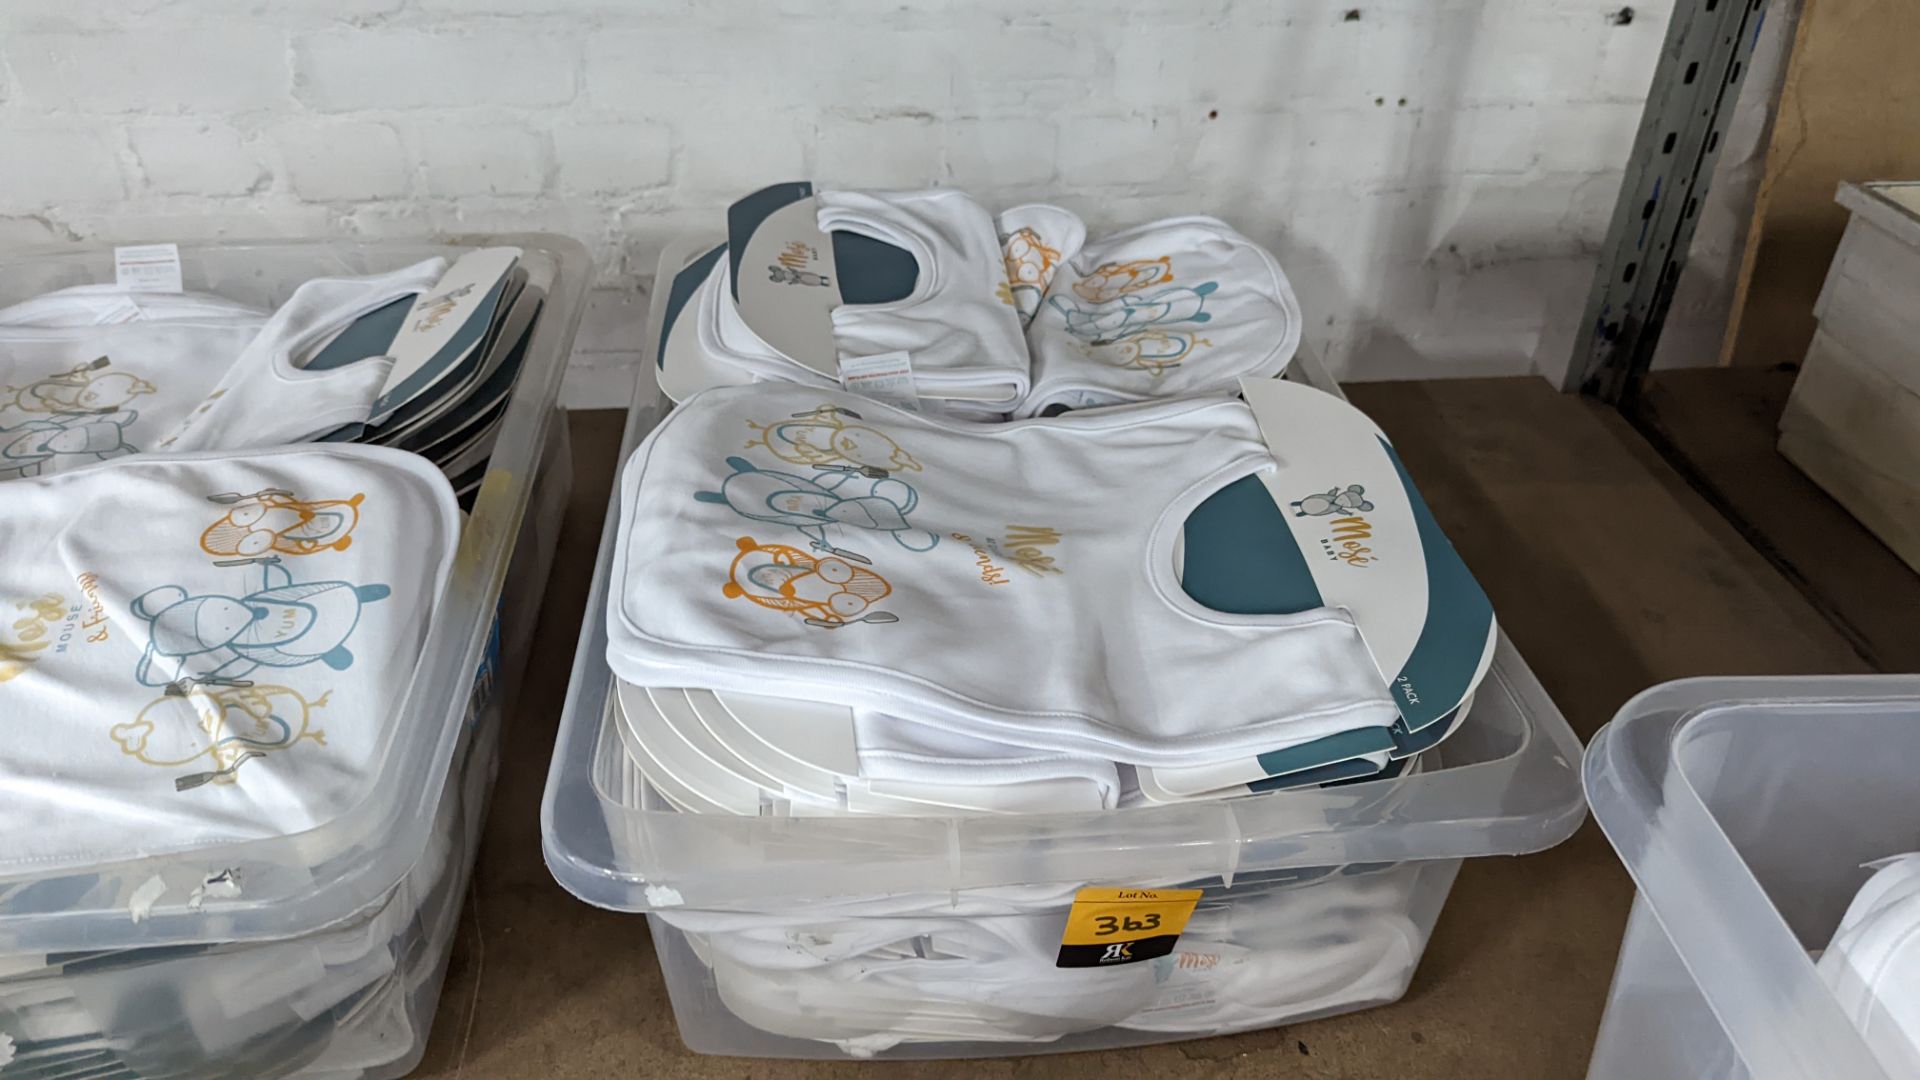 55 off Mosé Baby bibs twin packs. Retail price £10 per twin pack. Each twin pack comprises one pla - Image 2 of 5